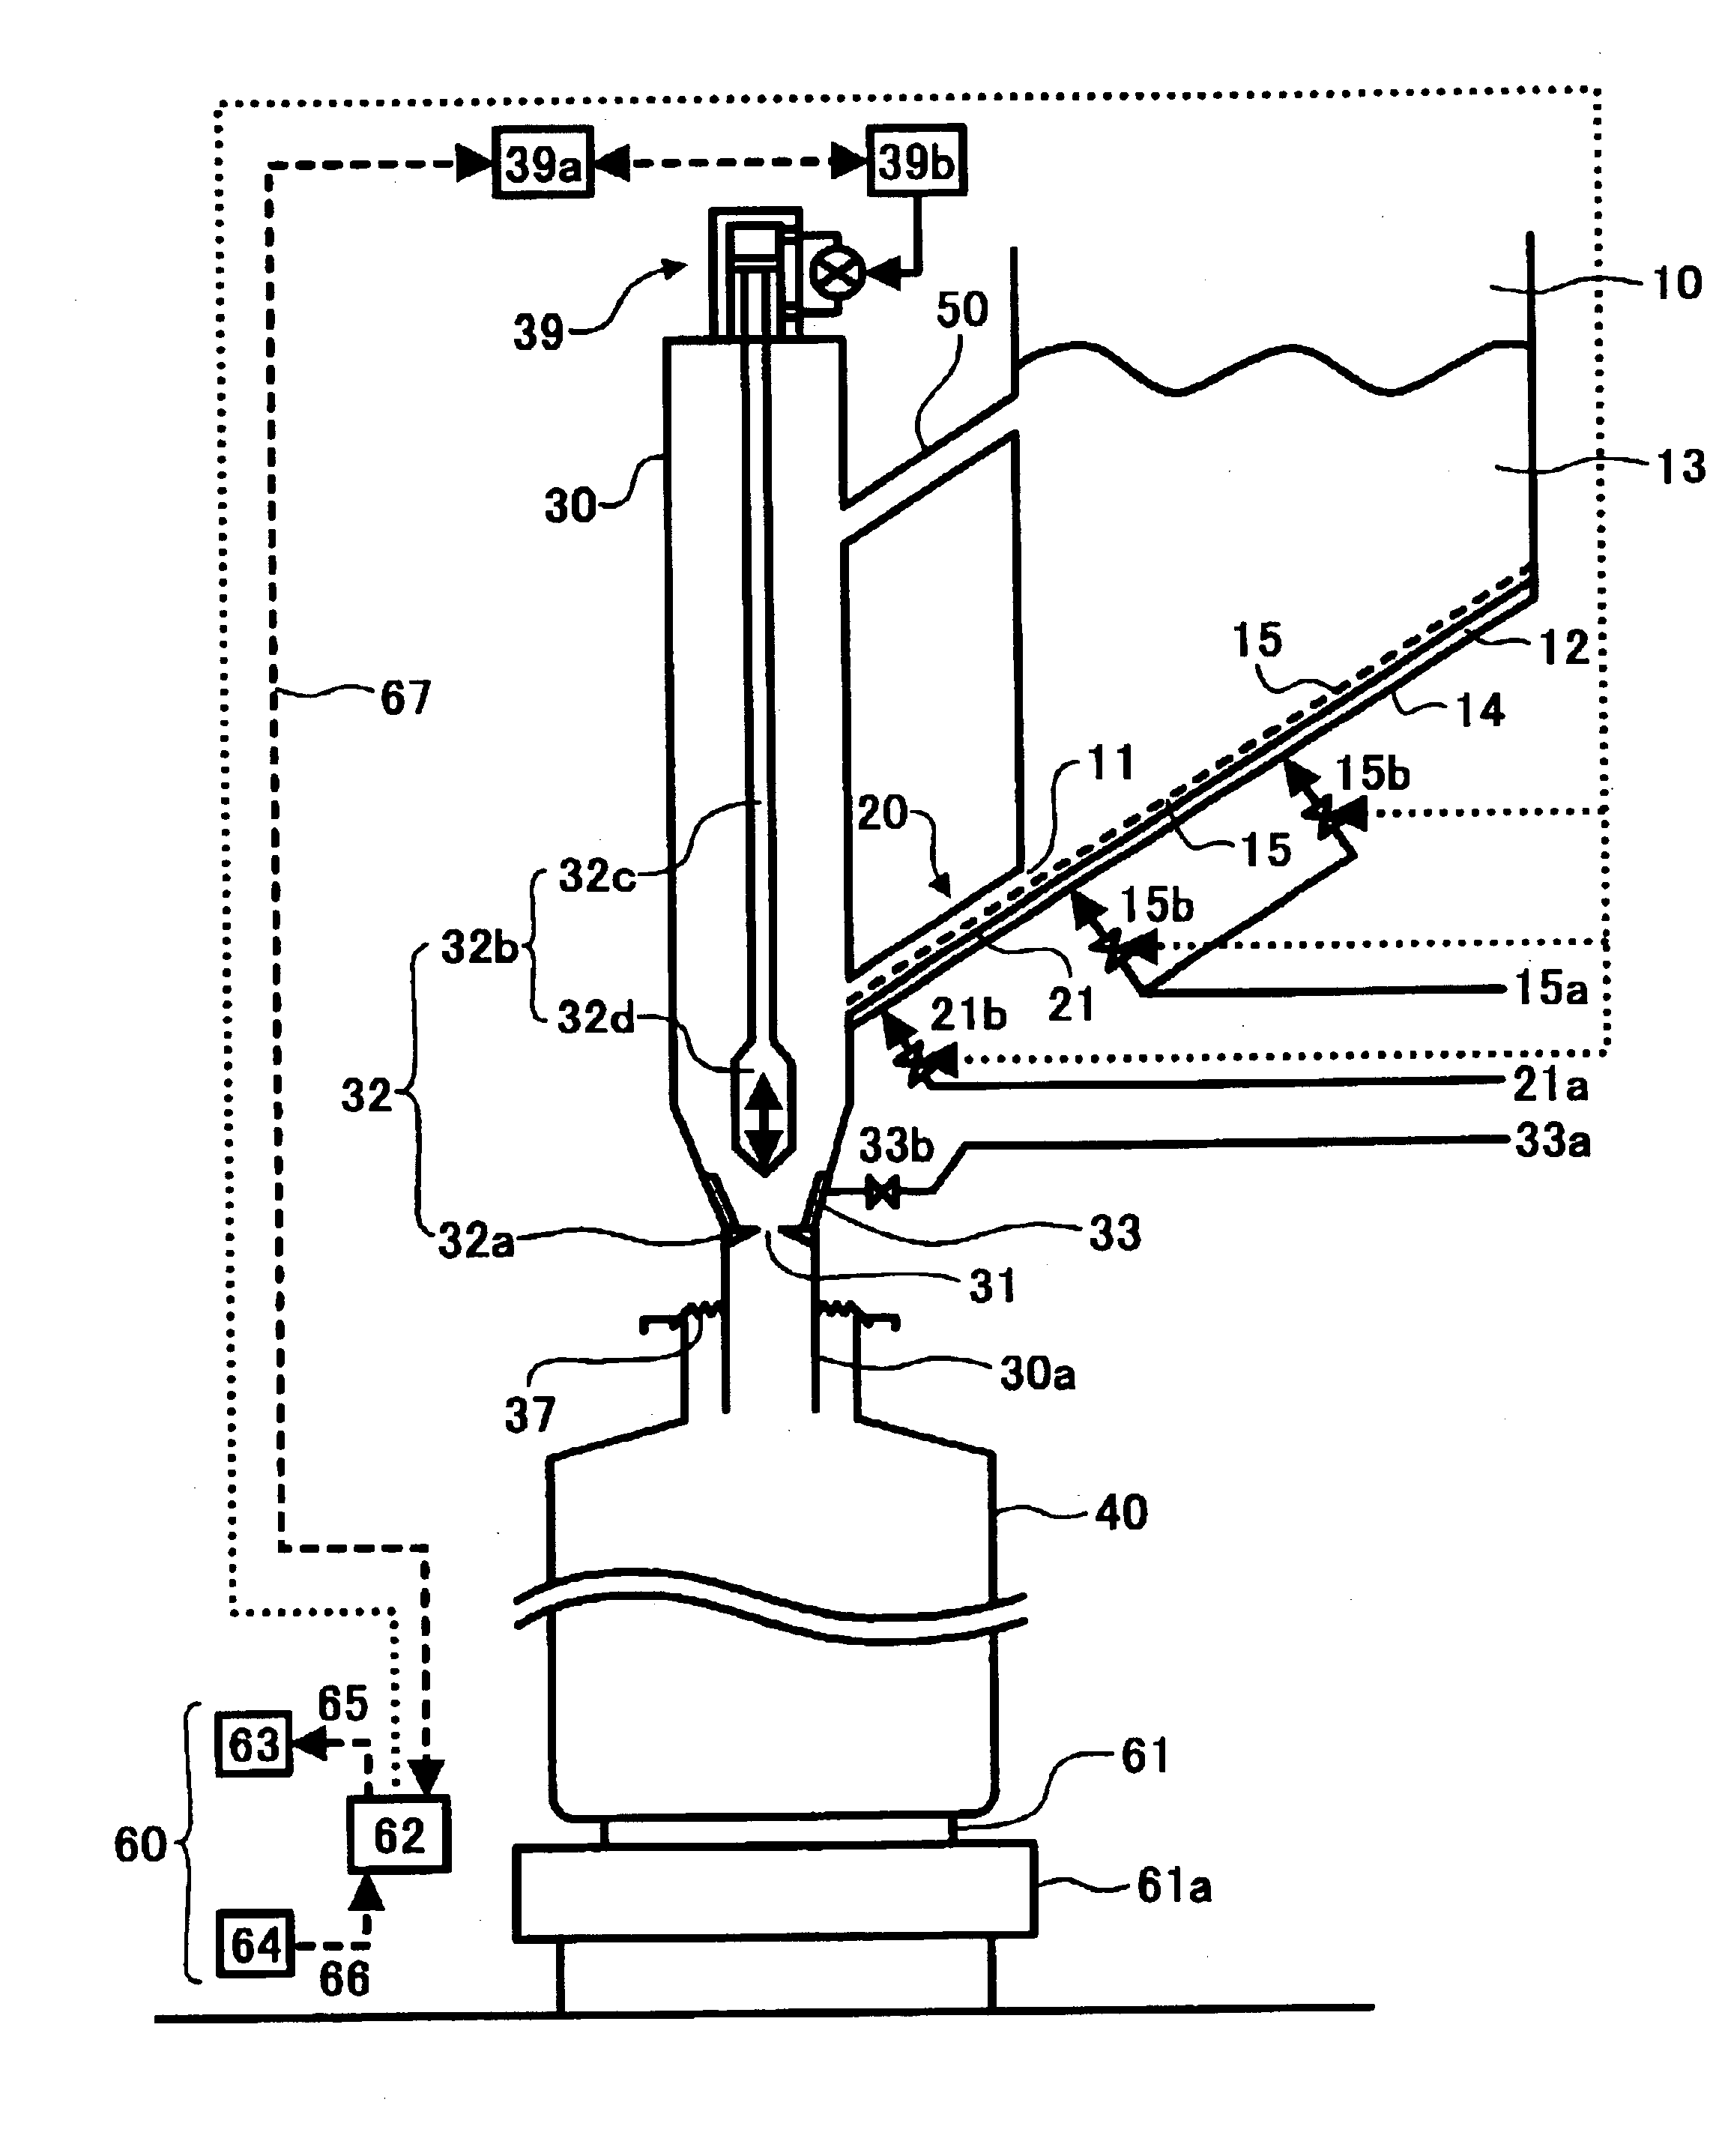 Apparatus and method of filling microscopic powder